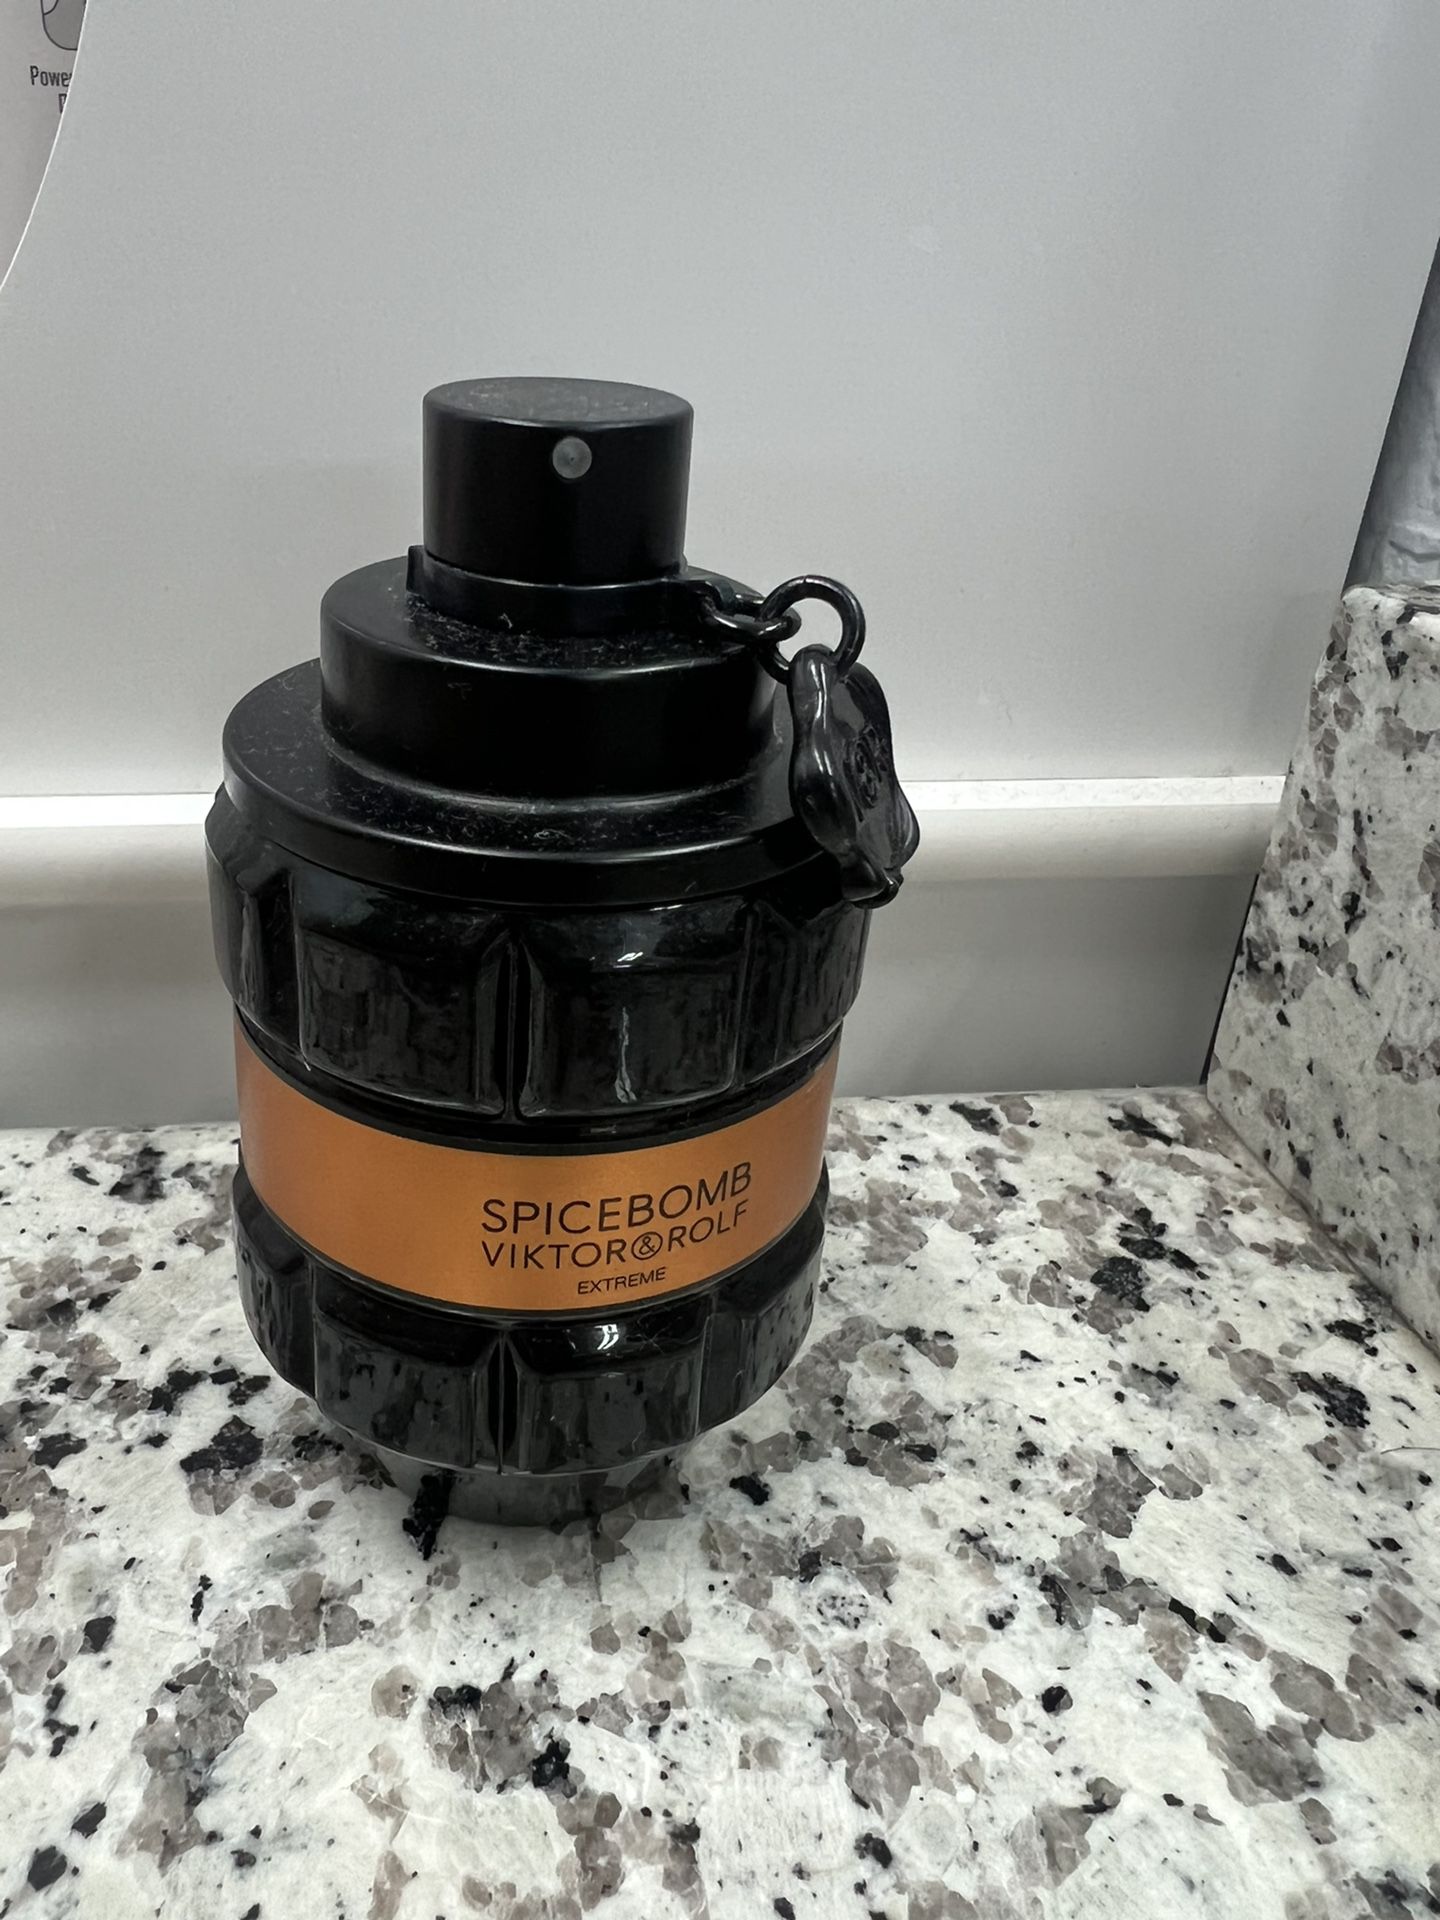 Viktor & Rolf Spicebomb Extreme for Sale in Corona, CA - OfferUp